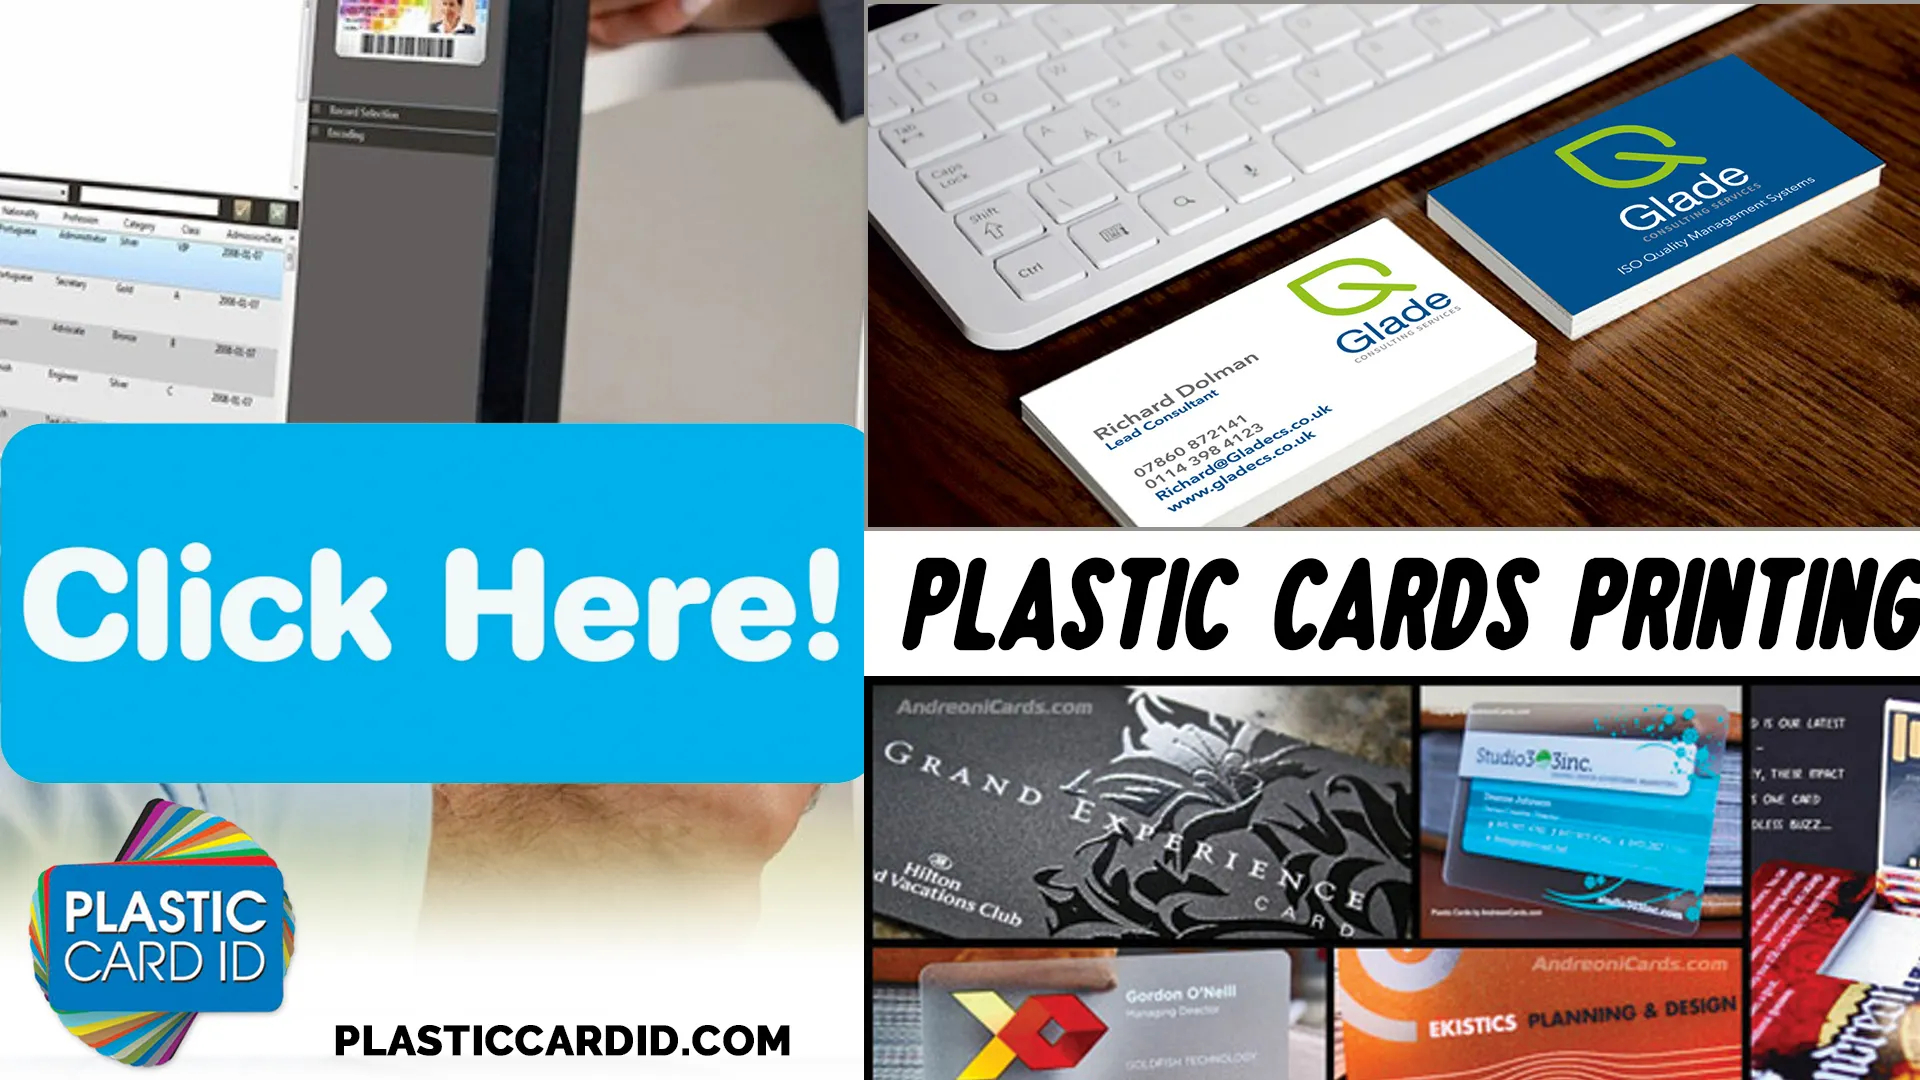 Recycling Cards: Turning the Old into New